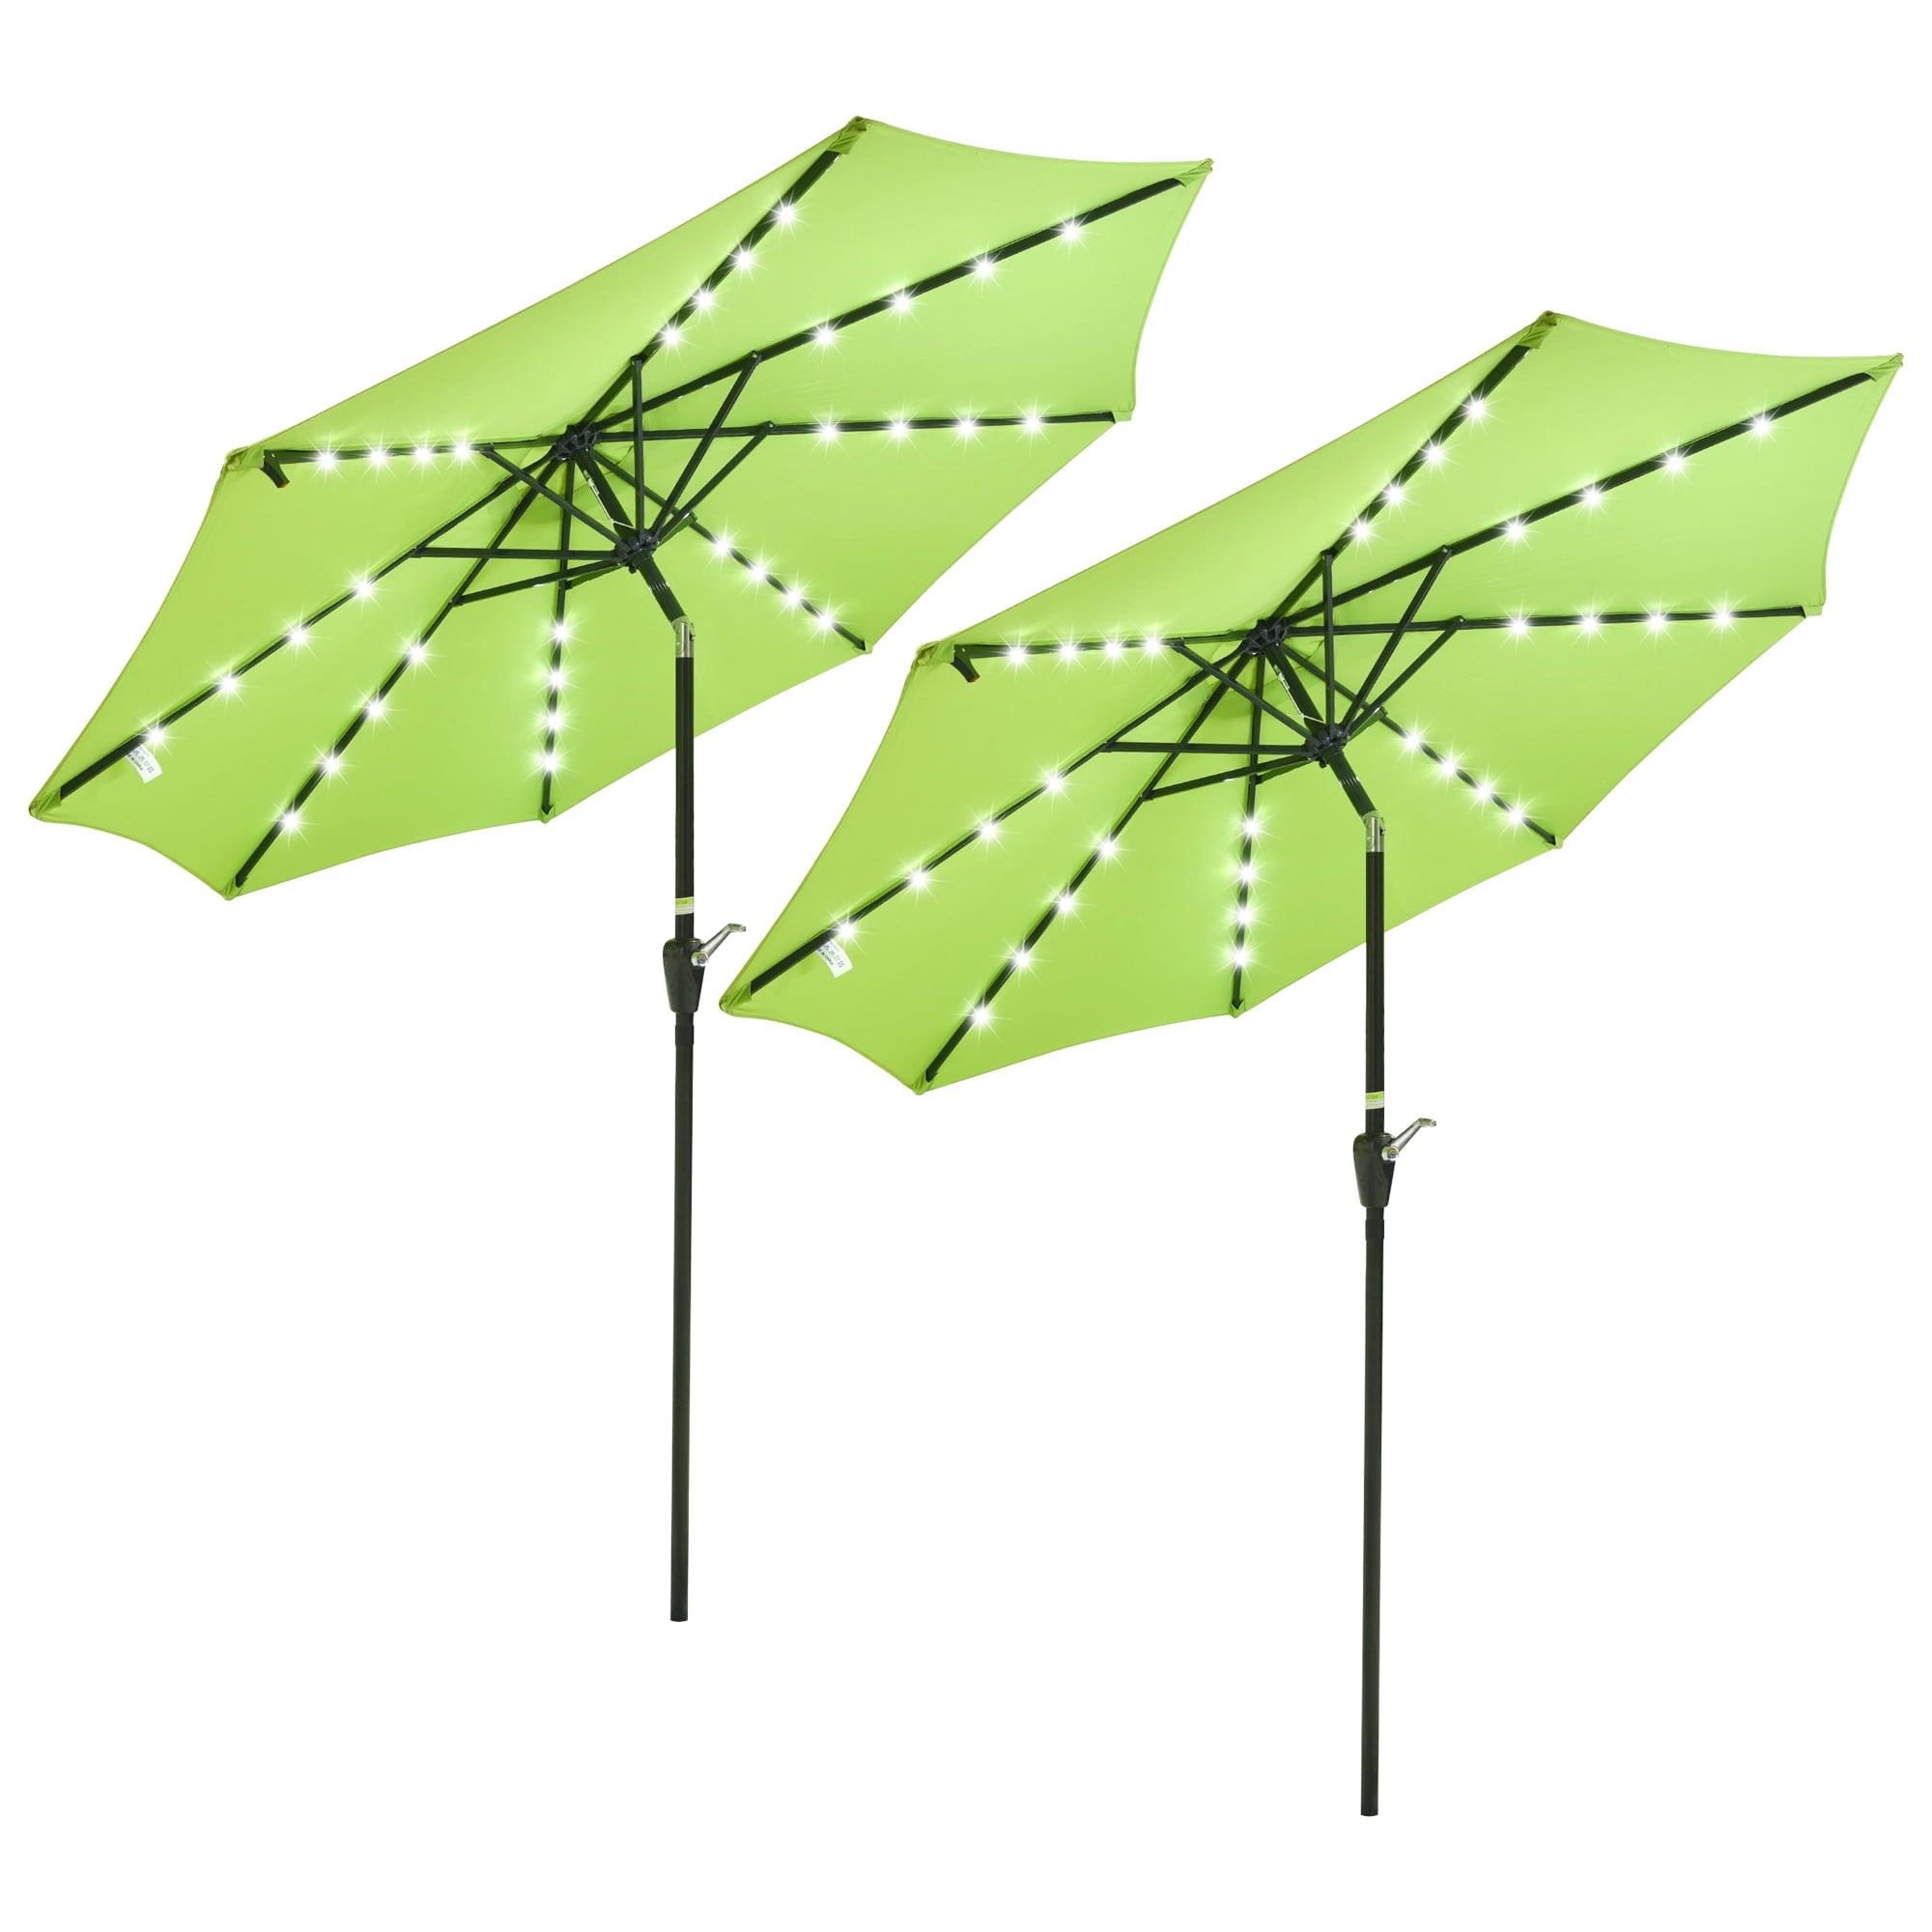 LAGarden 9 Ft 32 Solar Powered LED Light Outdoor Patio Umbrella with Crank Tilt for Table Market Pool Yard(Pack of 2)